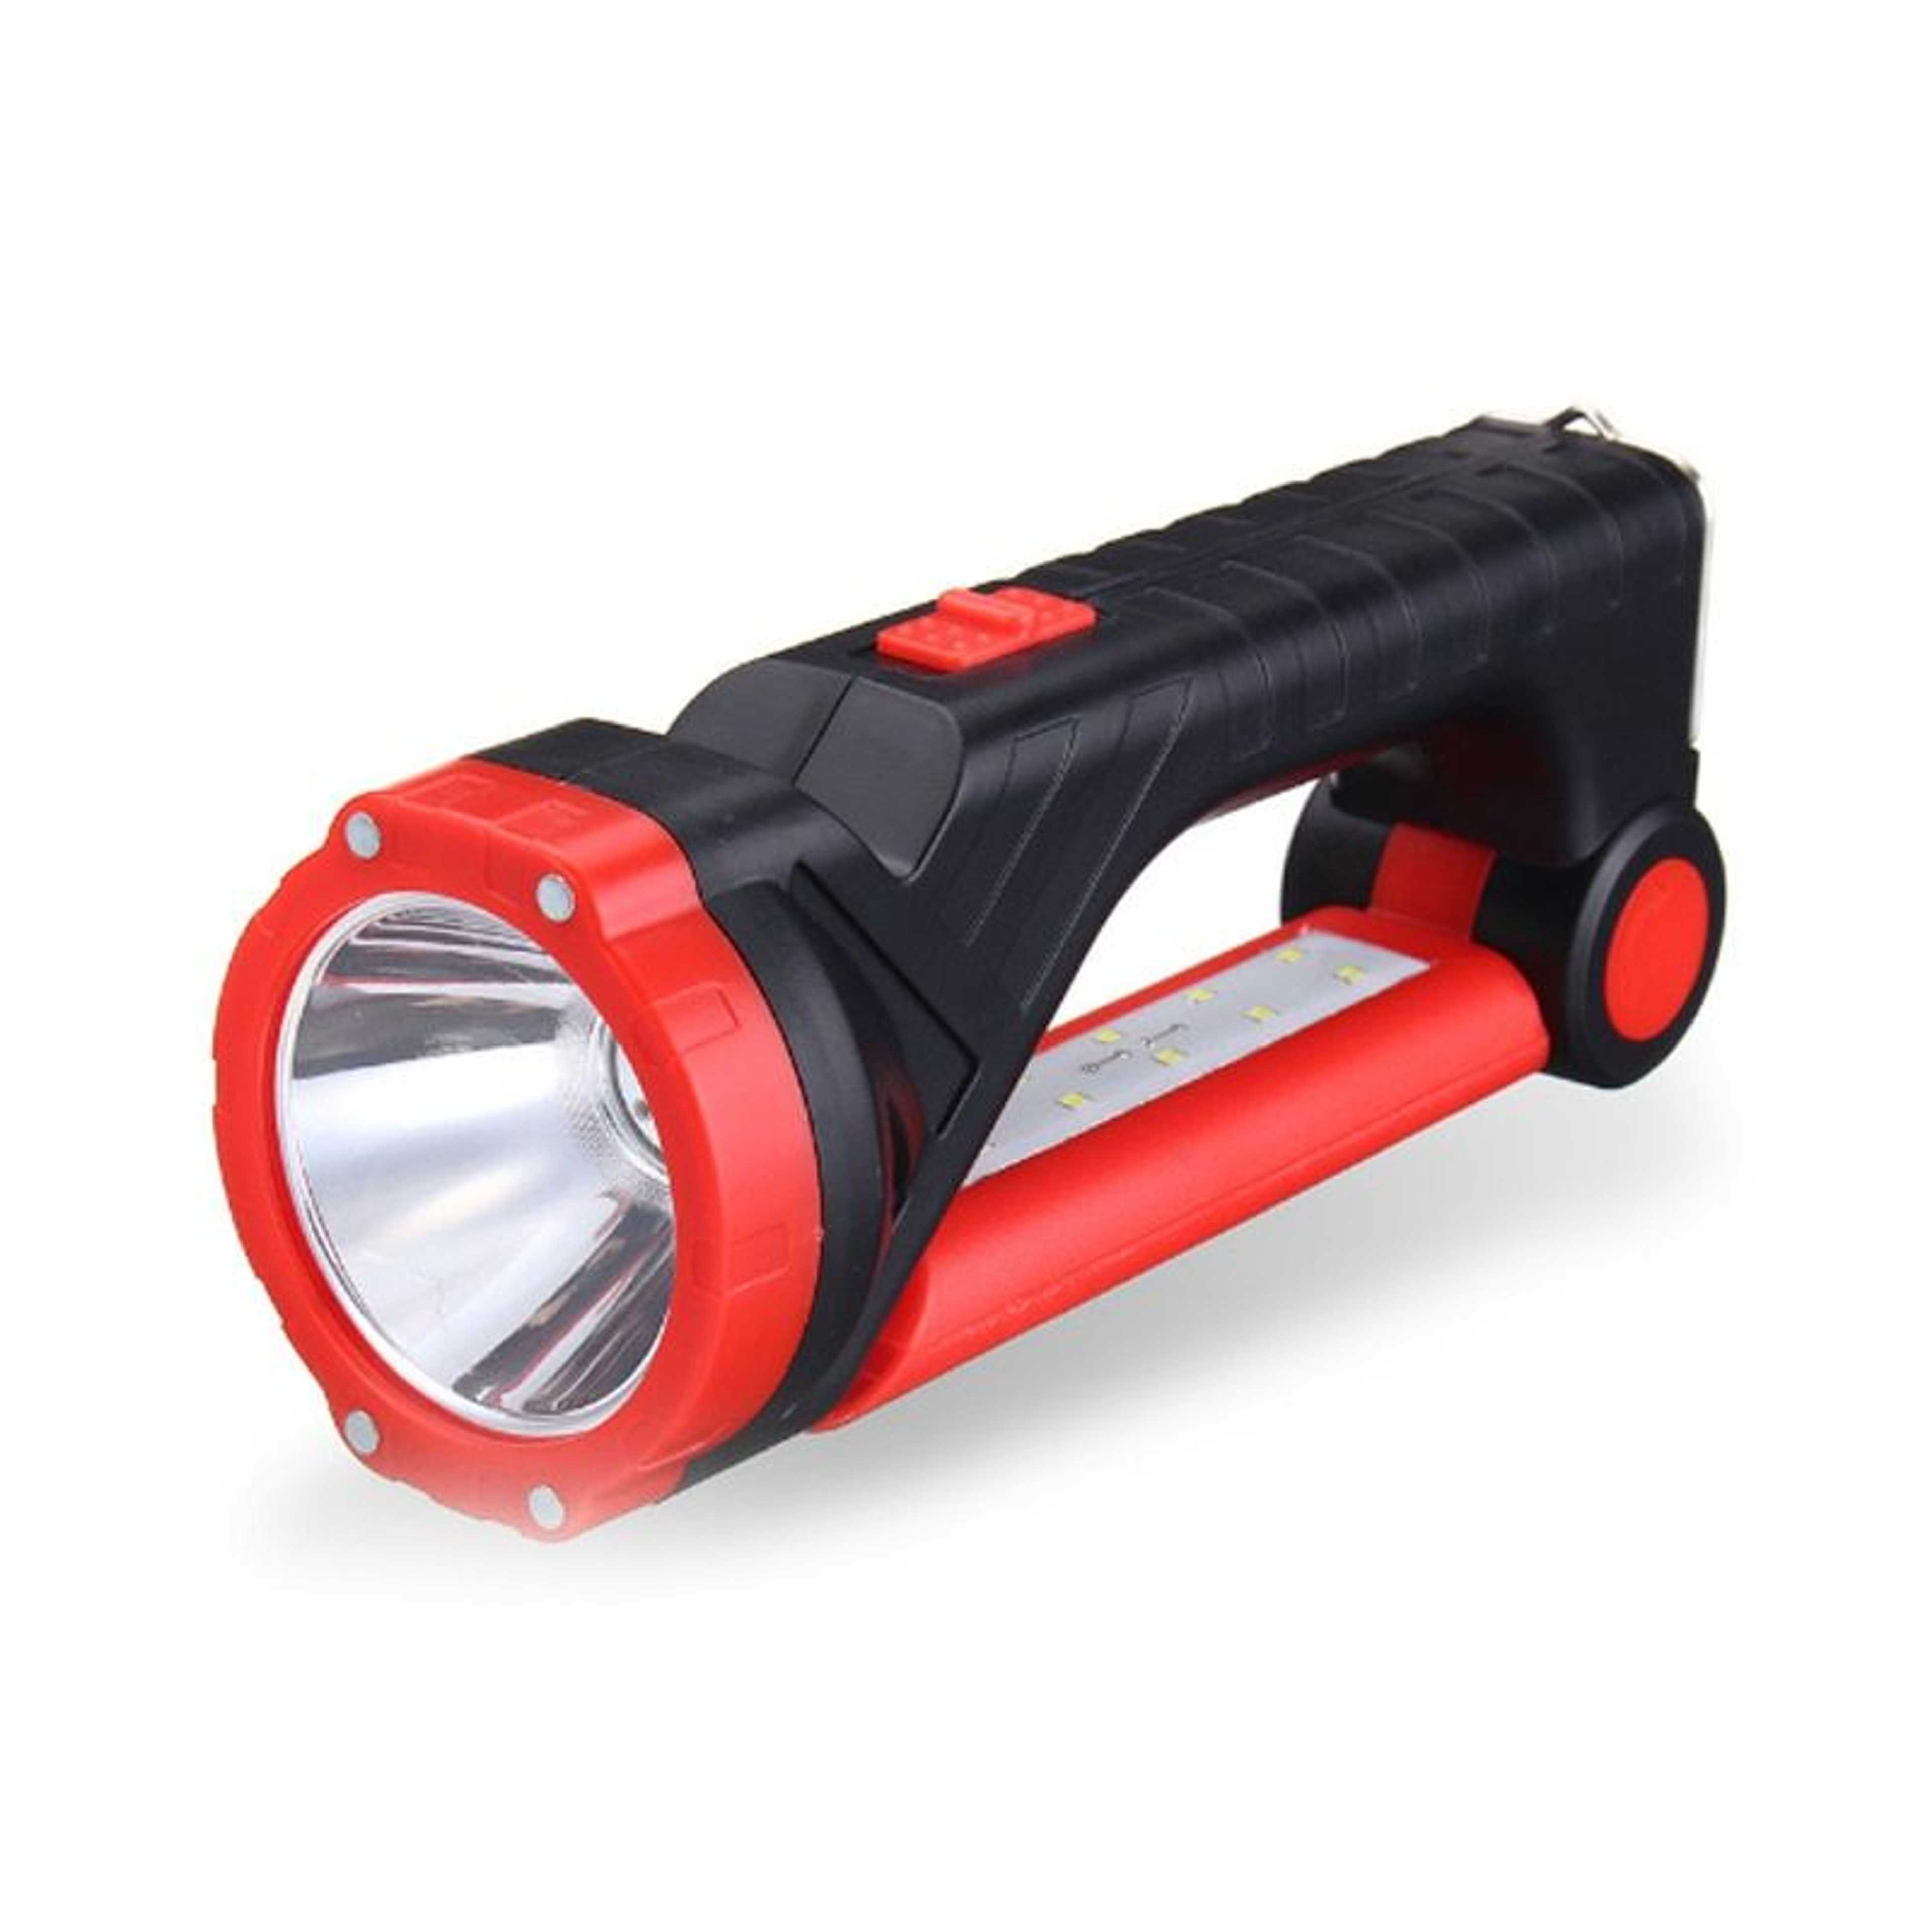 Multifunctional Flashlight Torch Solar Panel Charging With Hanging Hook For Outdoors